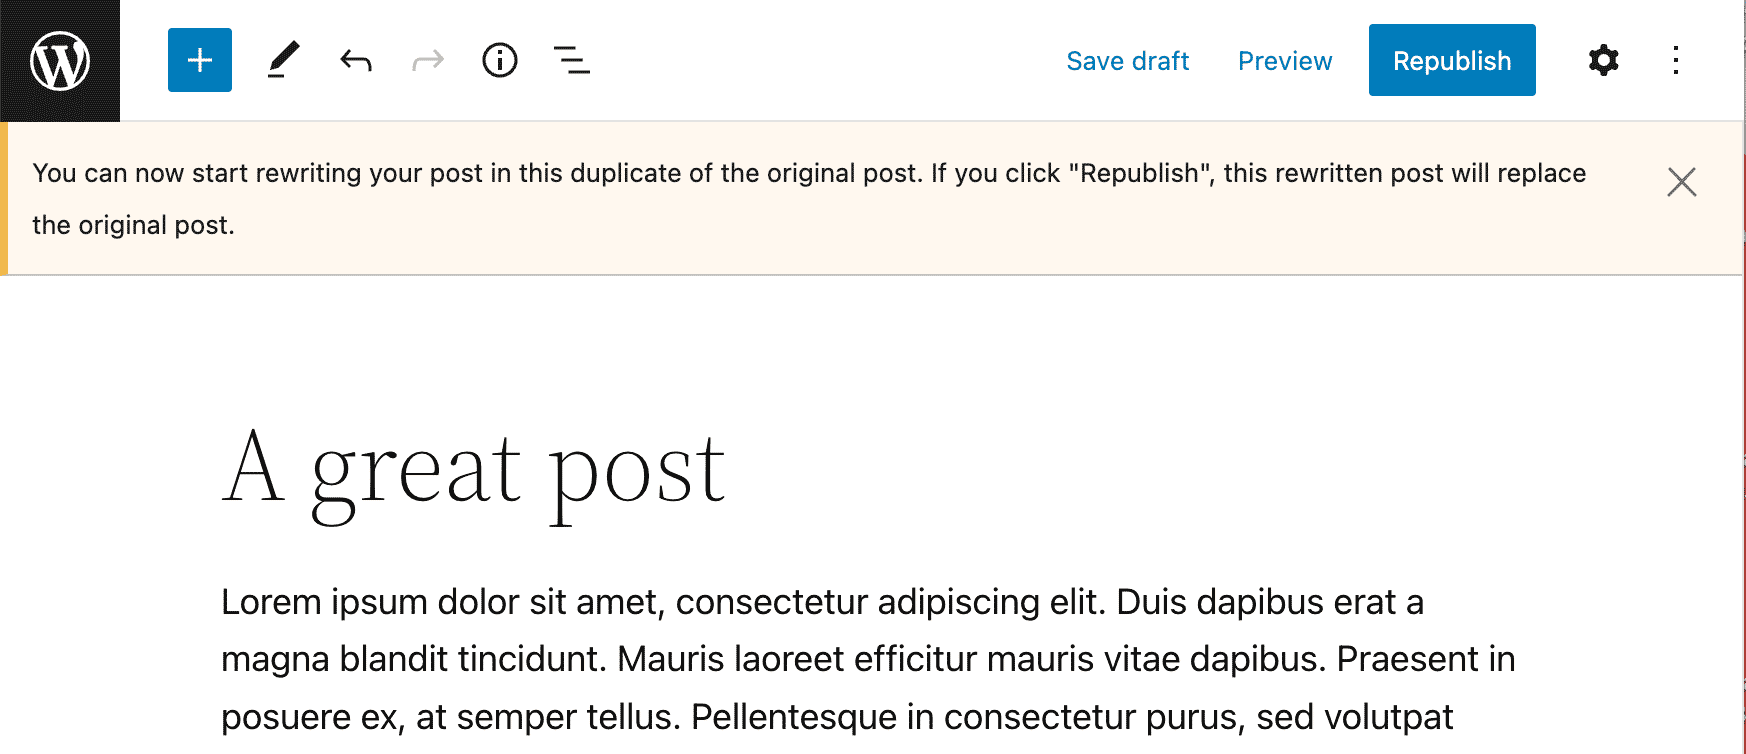 With Yoast Duplicate Post, a banner indicates which version of the post you are editing.